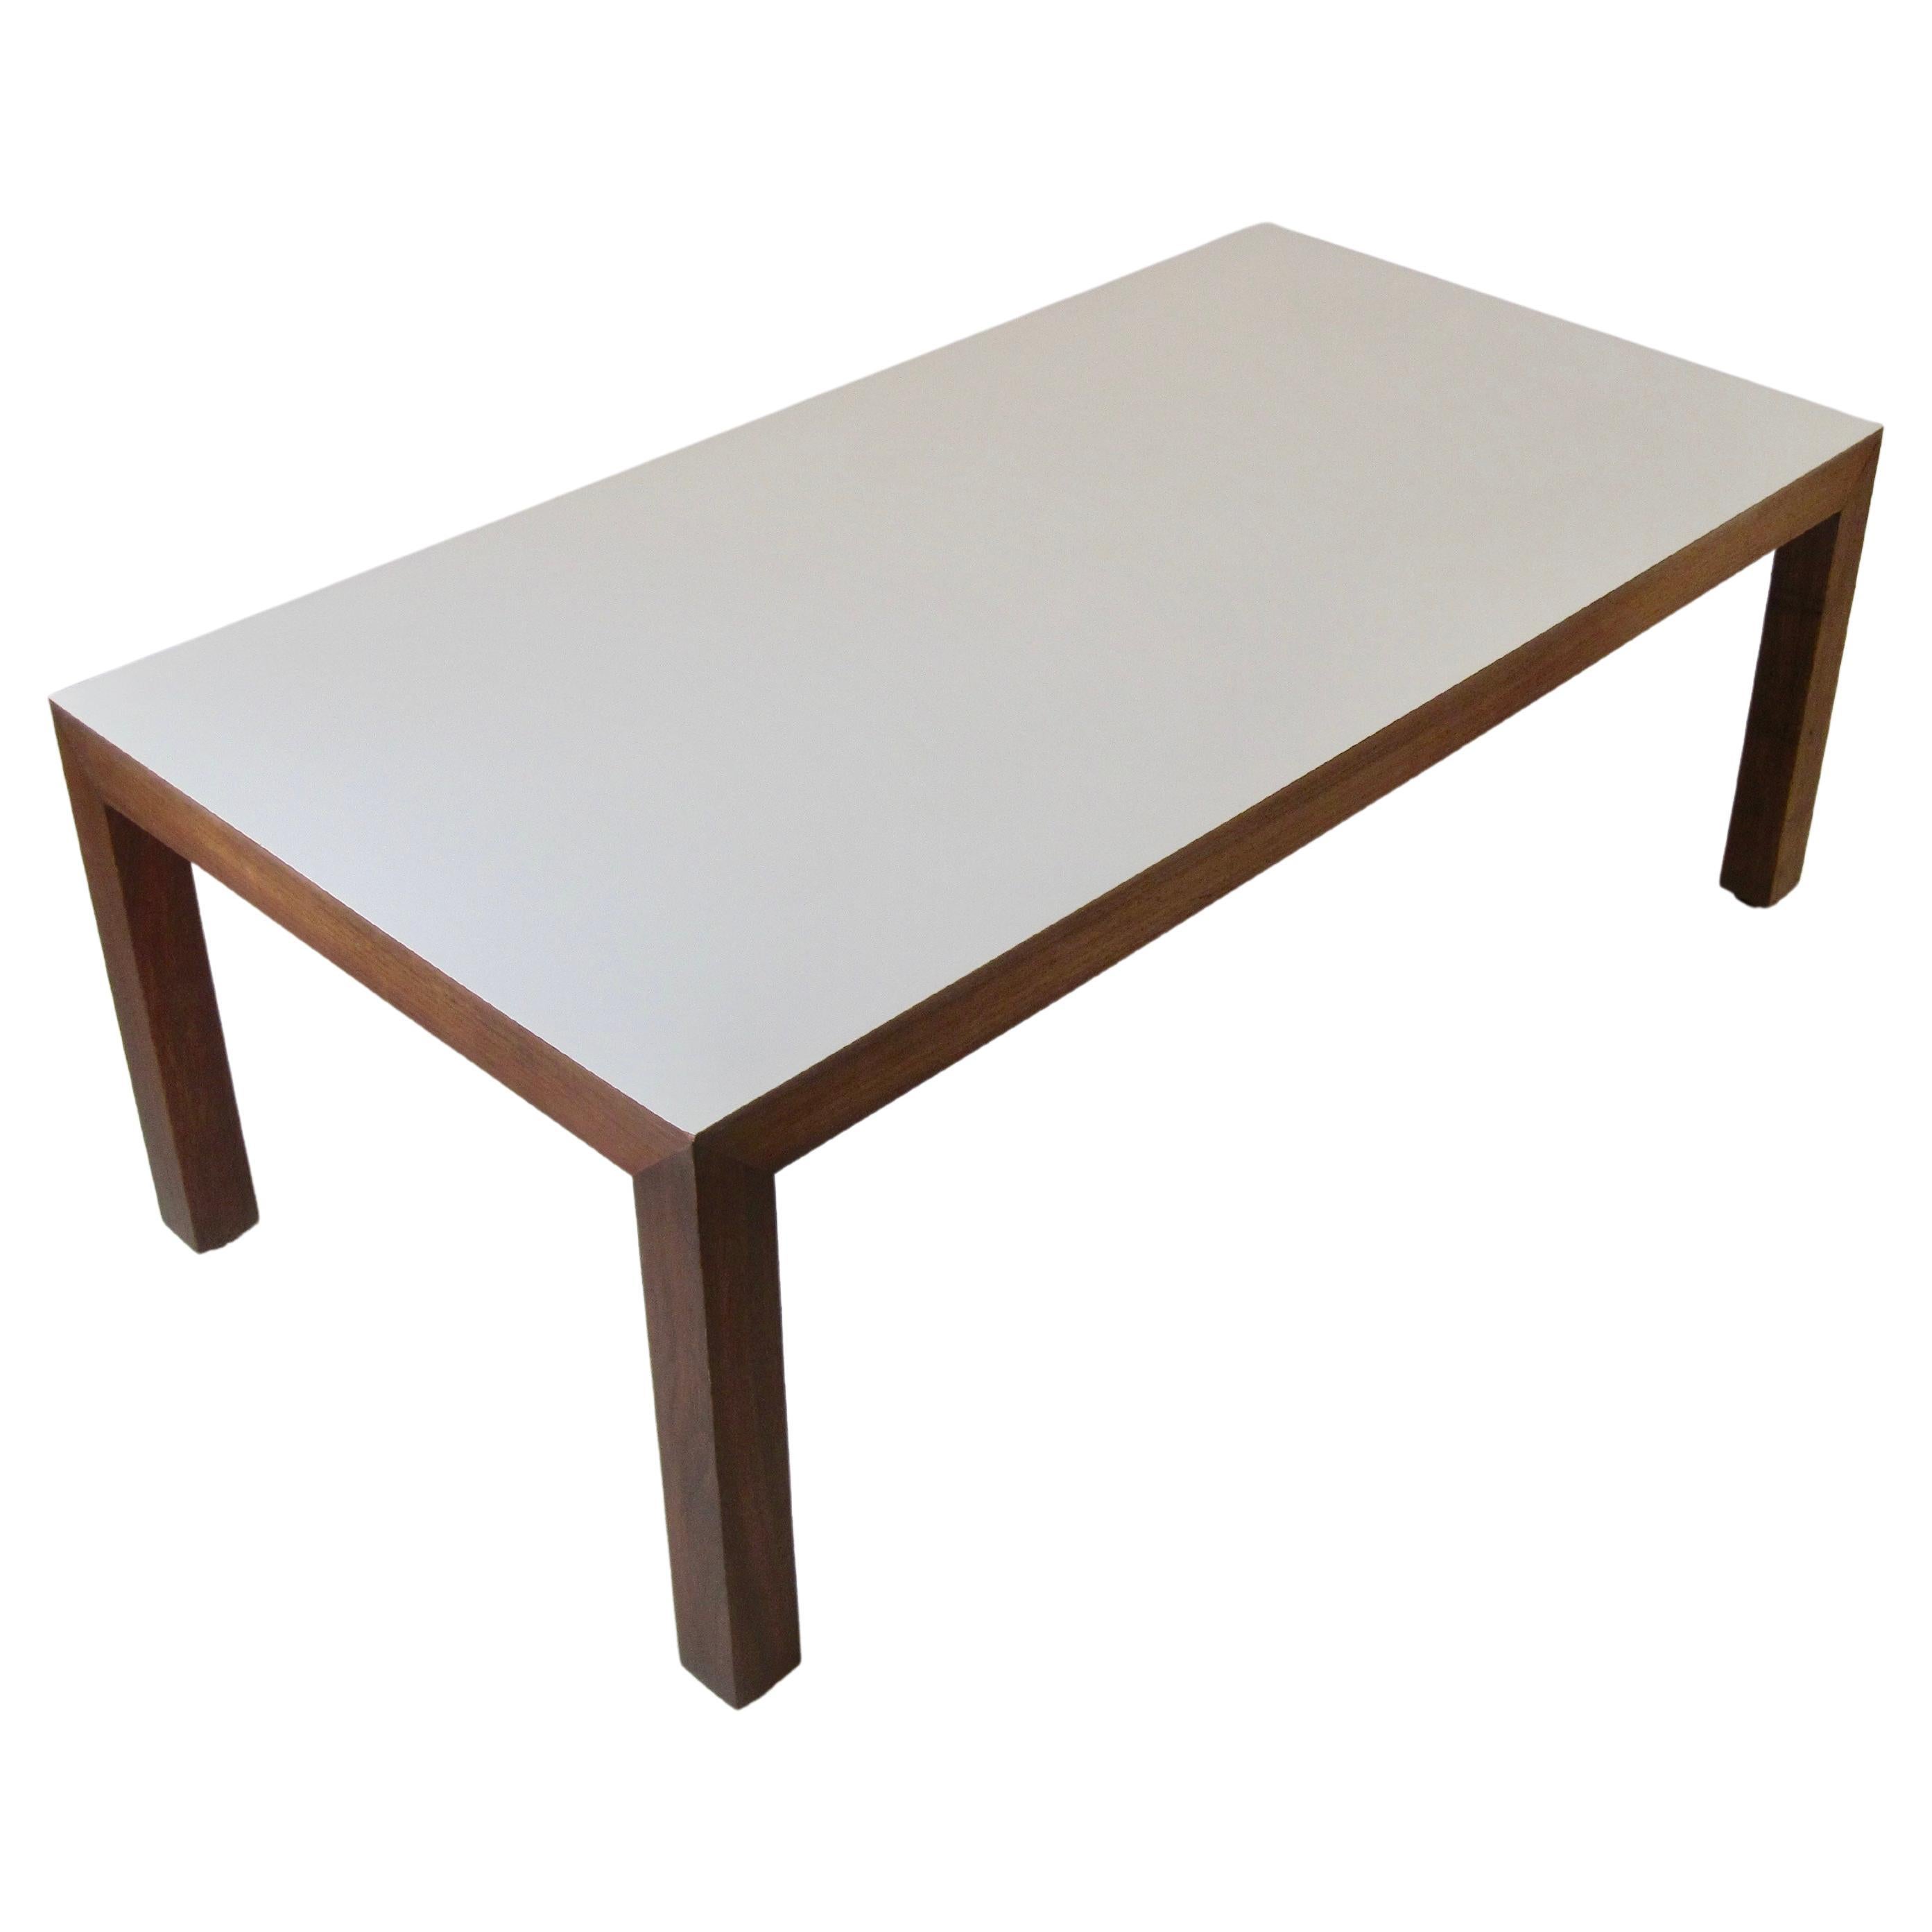 1960s Rectangular Wood Coffee Table with White Formica Laminate Top